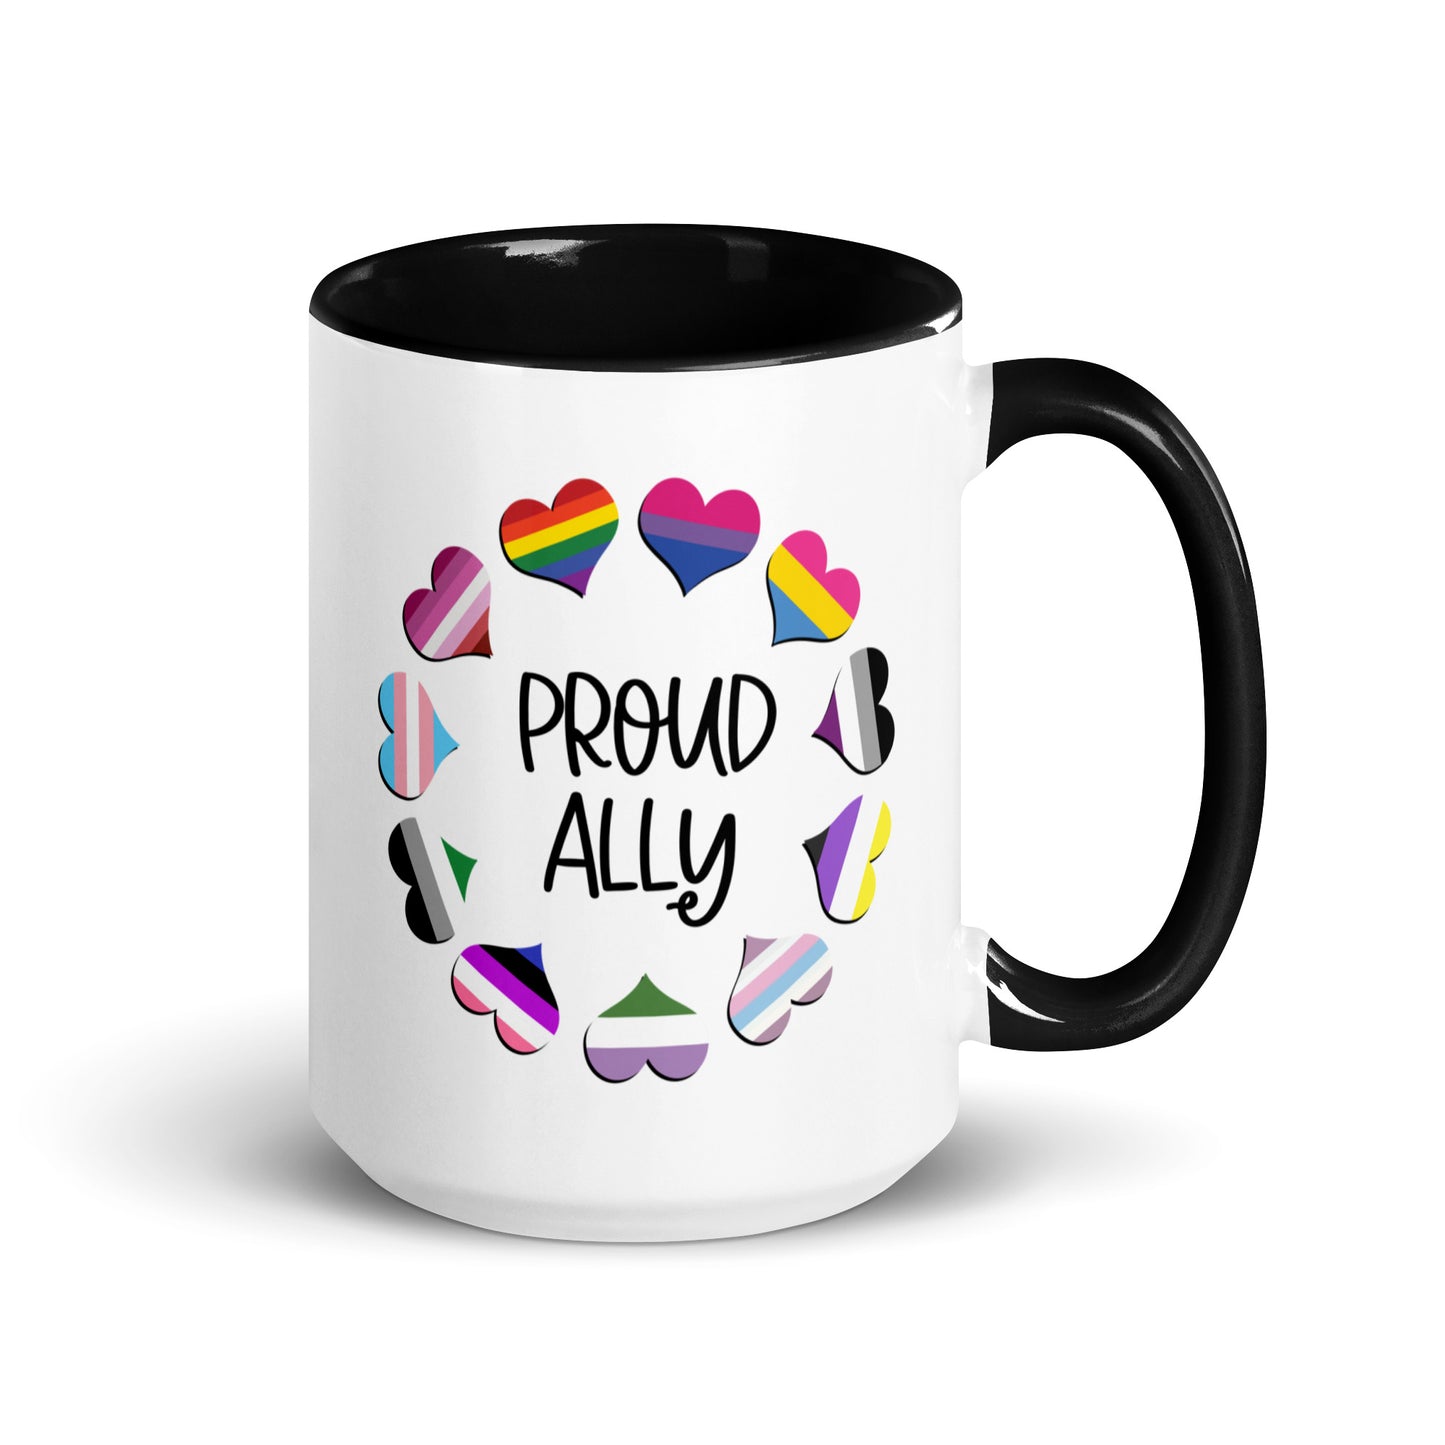 Proud Ally Mug in two sizes